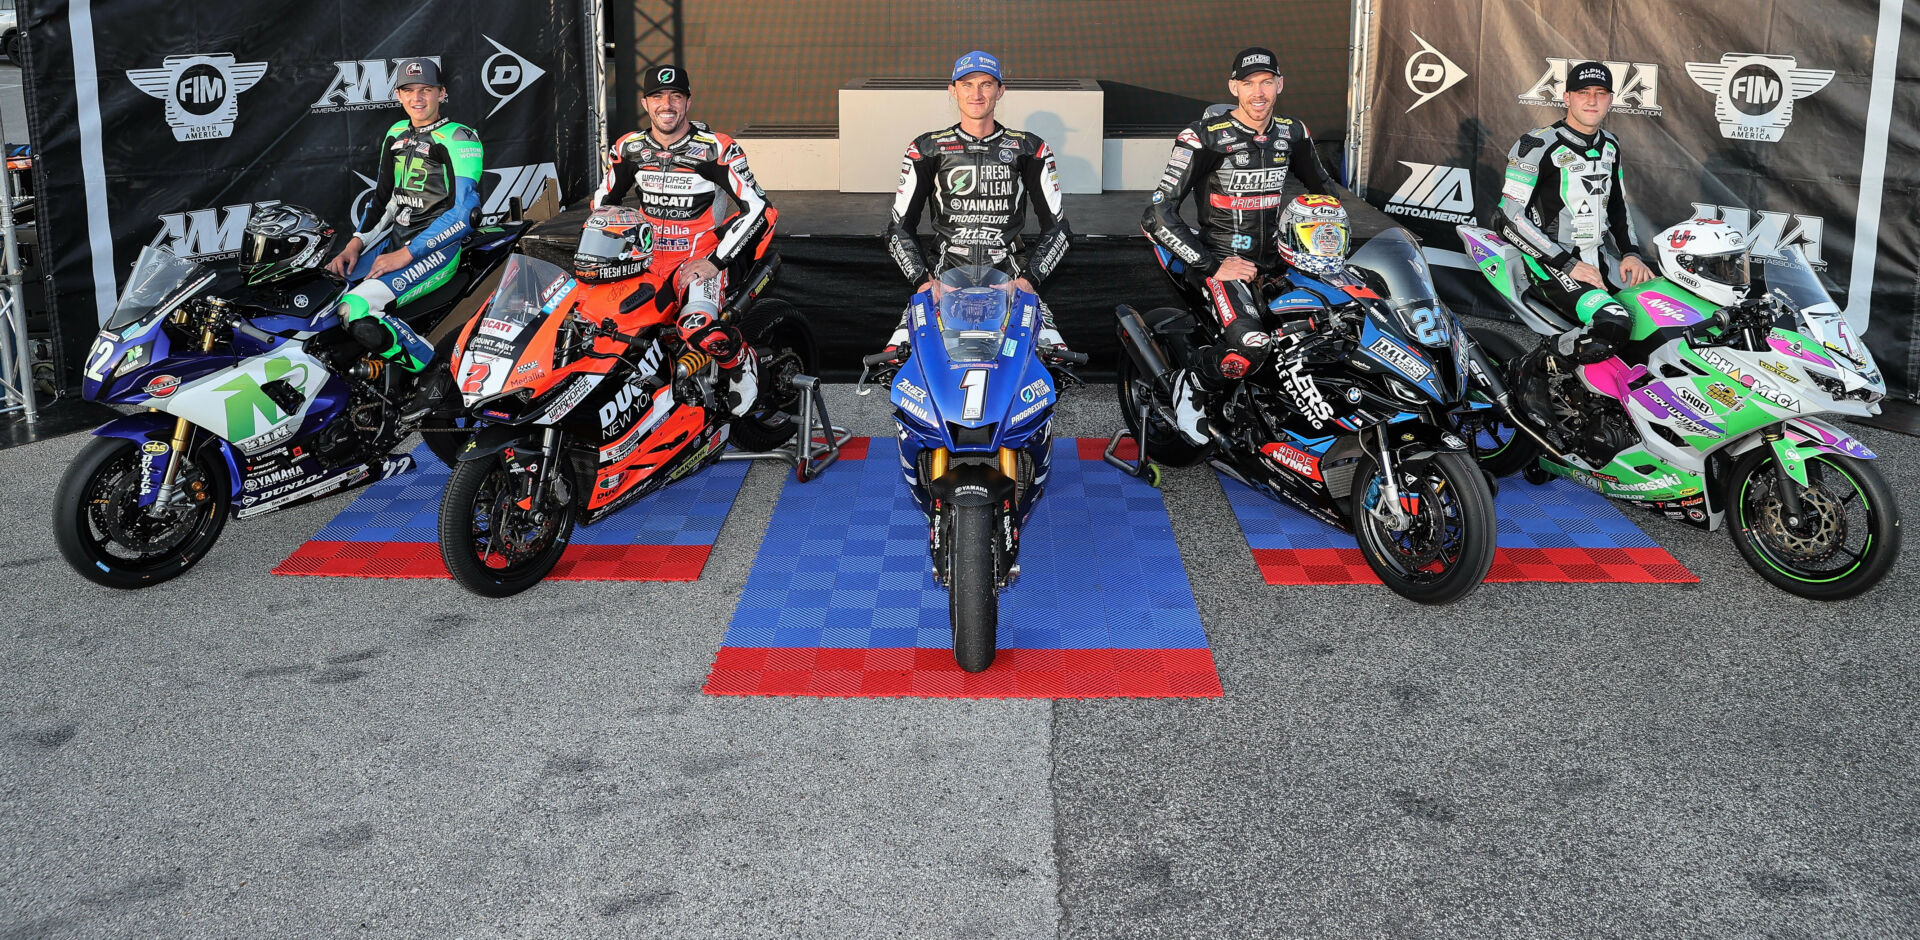 Some of the 2022 MotoAmerica AMA/FIM North American Road Racing Championships (from left): Blake Davis (Twins Cup), Josh Herrin (Supersport), Jake Gagne (Superbike), Corey Alexander (Stock 1000), and Cody Wyman (Junior Cup). Photo by Brian J. Nelson.